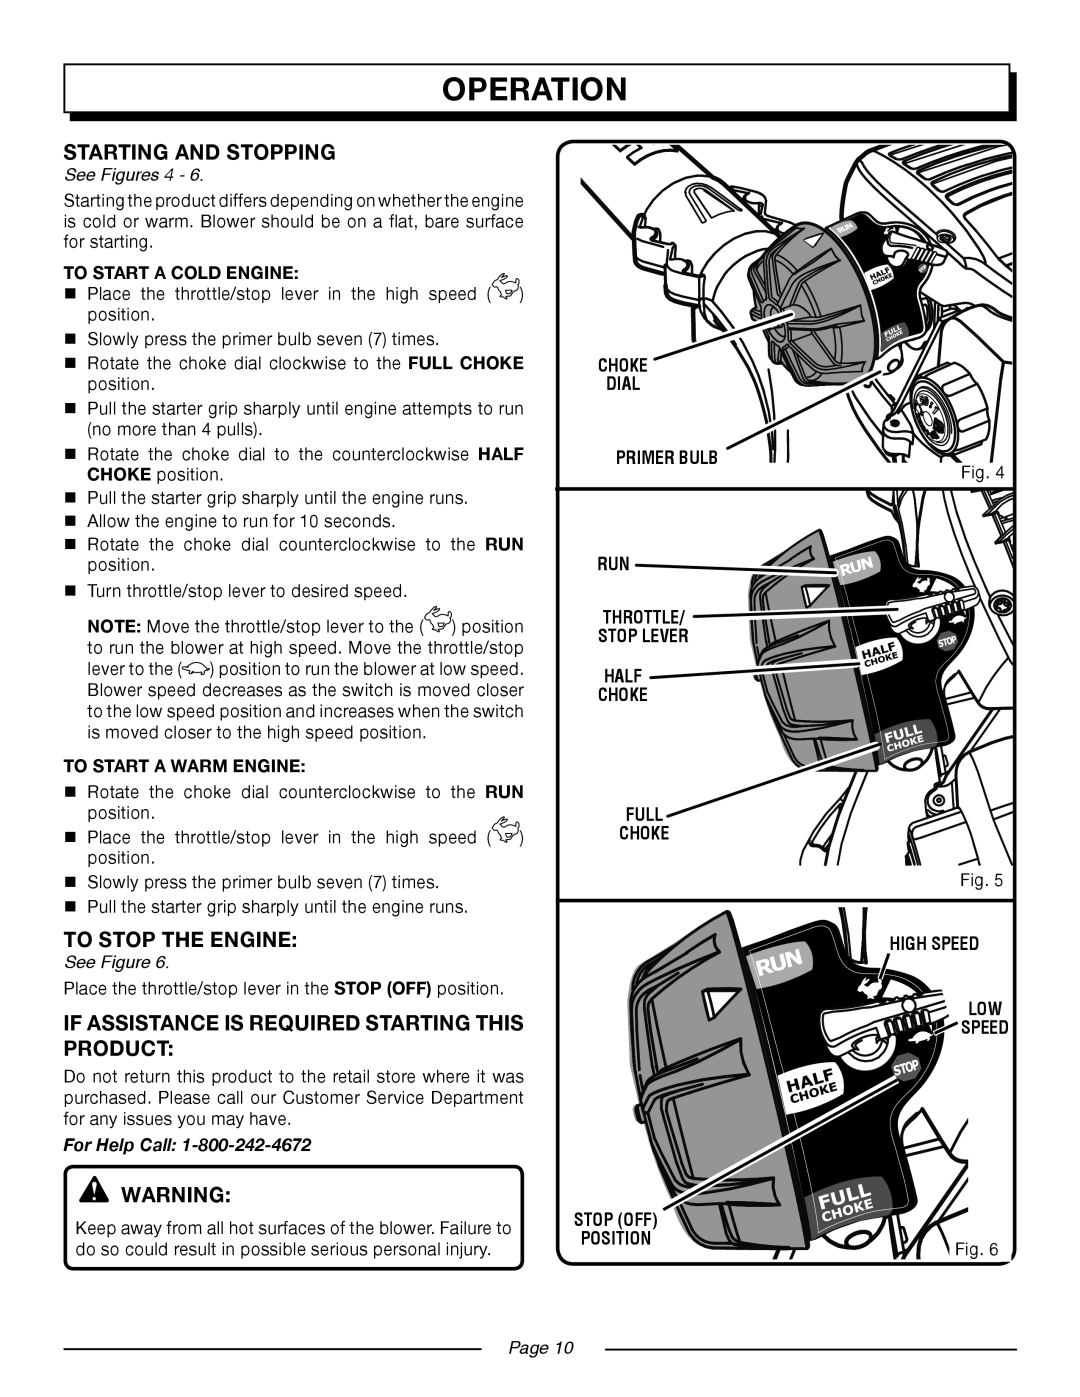 Homelite UT08520 Starting And Stopping, To Stop The Engine, if assistance is required STARTING THIS product, operation 